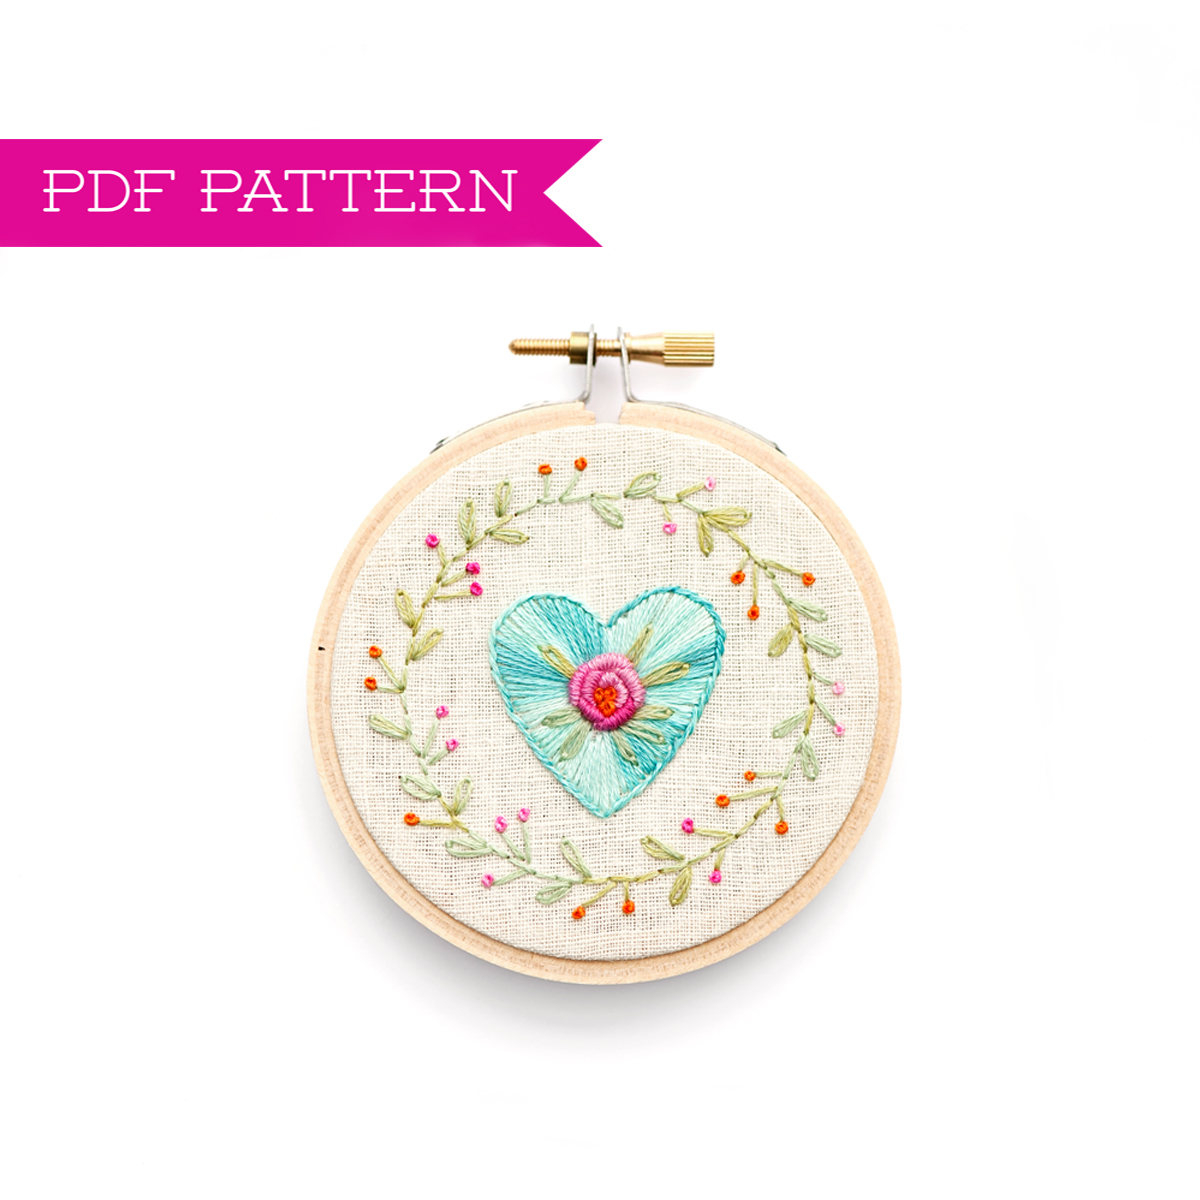 Patterns For Embroidery Embroidery Pattern Pdf Heart Pattern Hand Embroidery Patterns Embroidery Pattern Embroidery Pdf Floral Embroidery Hoop Art